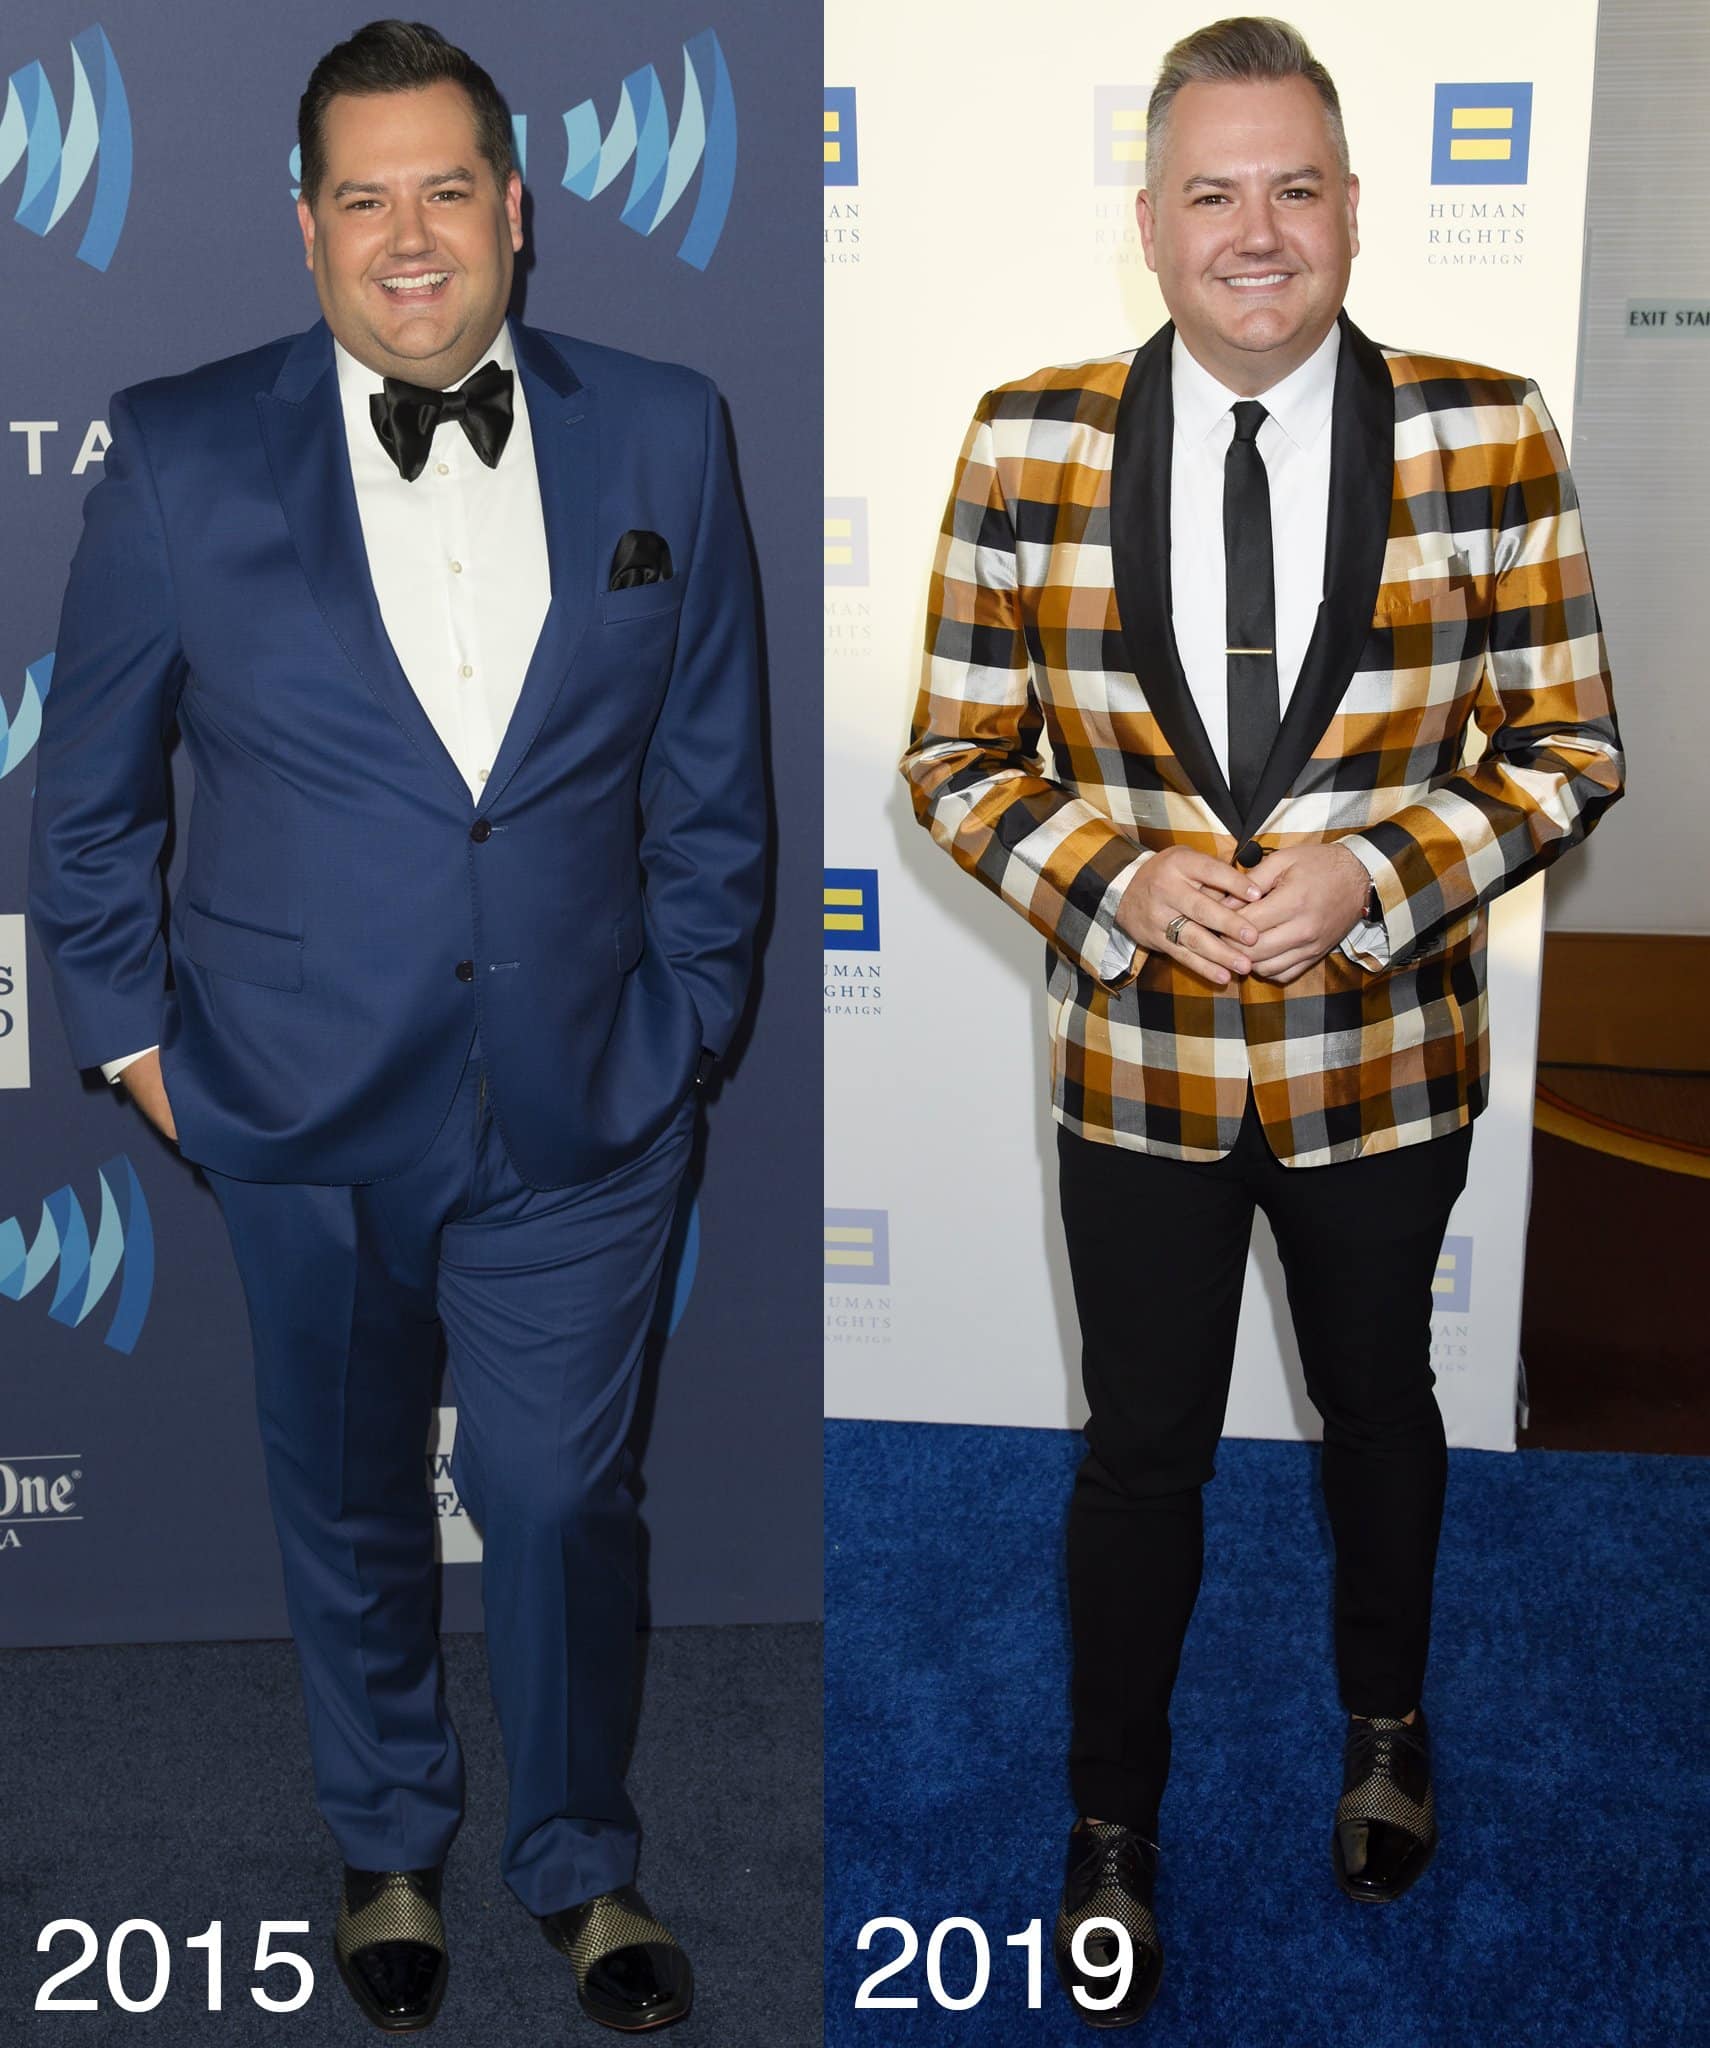 Ross Mathews lost 50 pounds after changing his diet and lifestyle